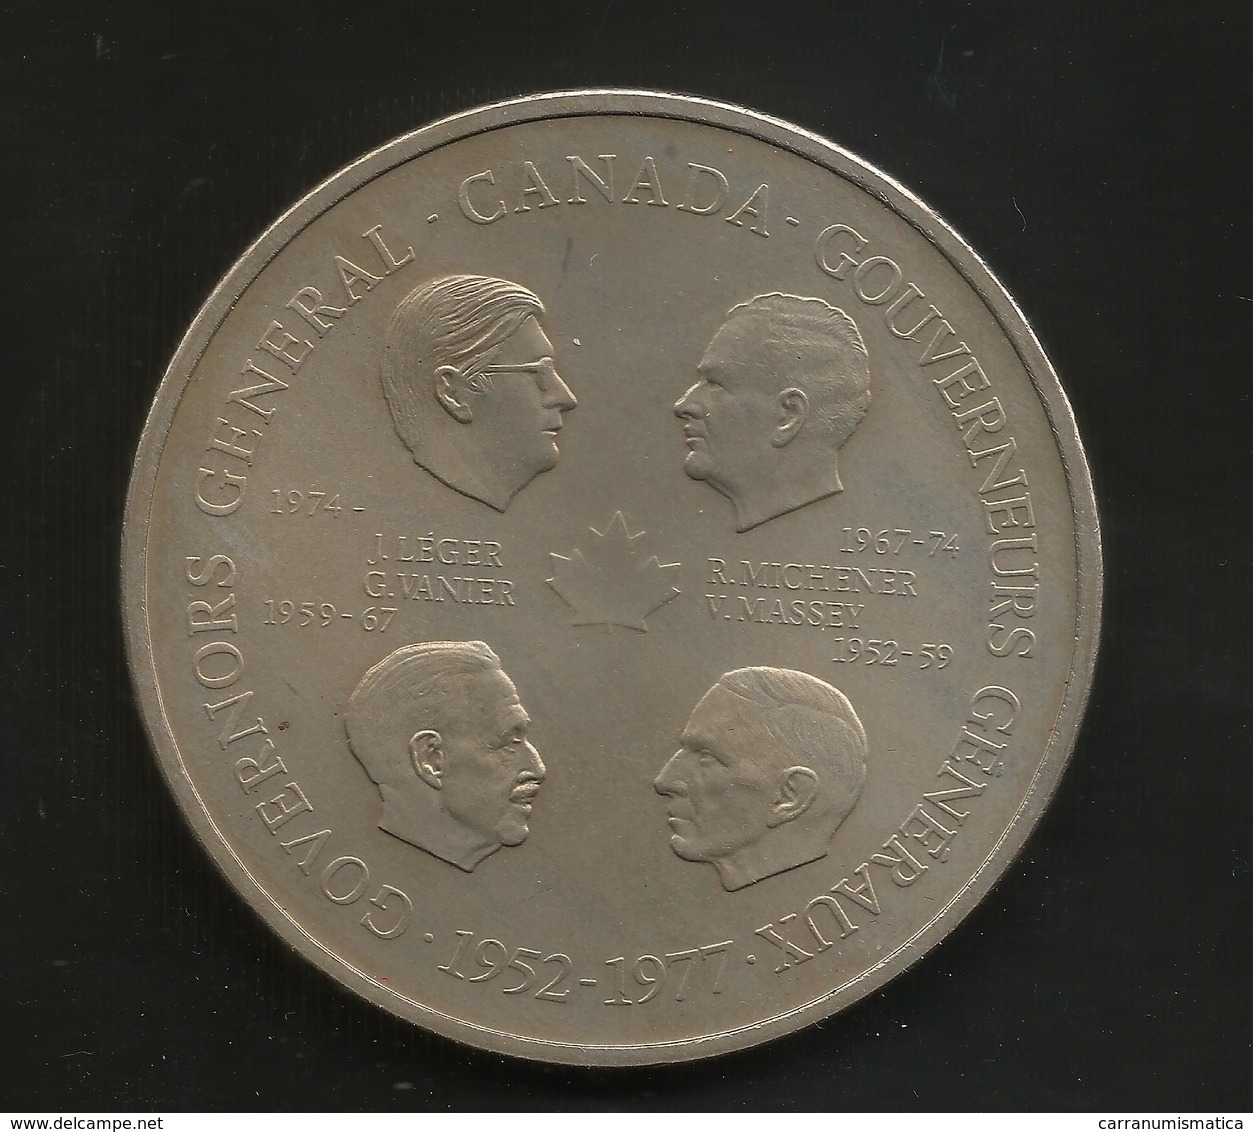 CANADA - Commemorative Medal - Governors General / Jubilee (1952 - 1977) God Save The Queen / 45mm - Royal / Of Nobility